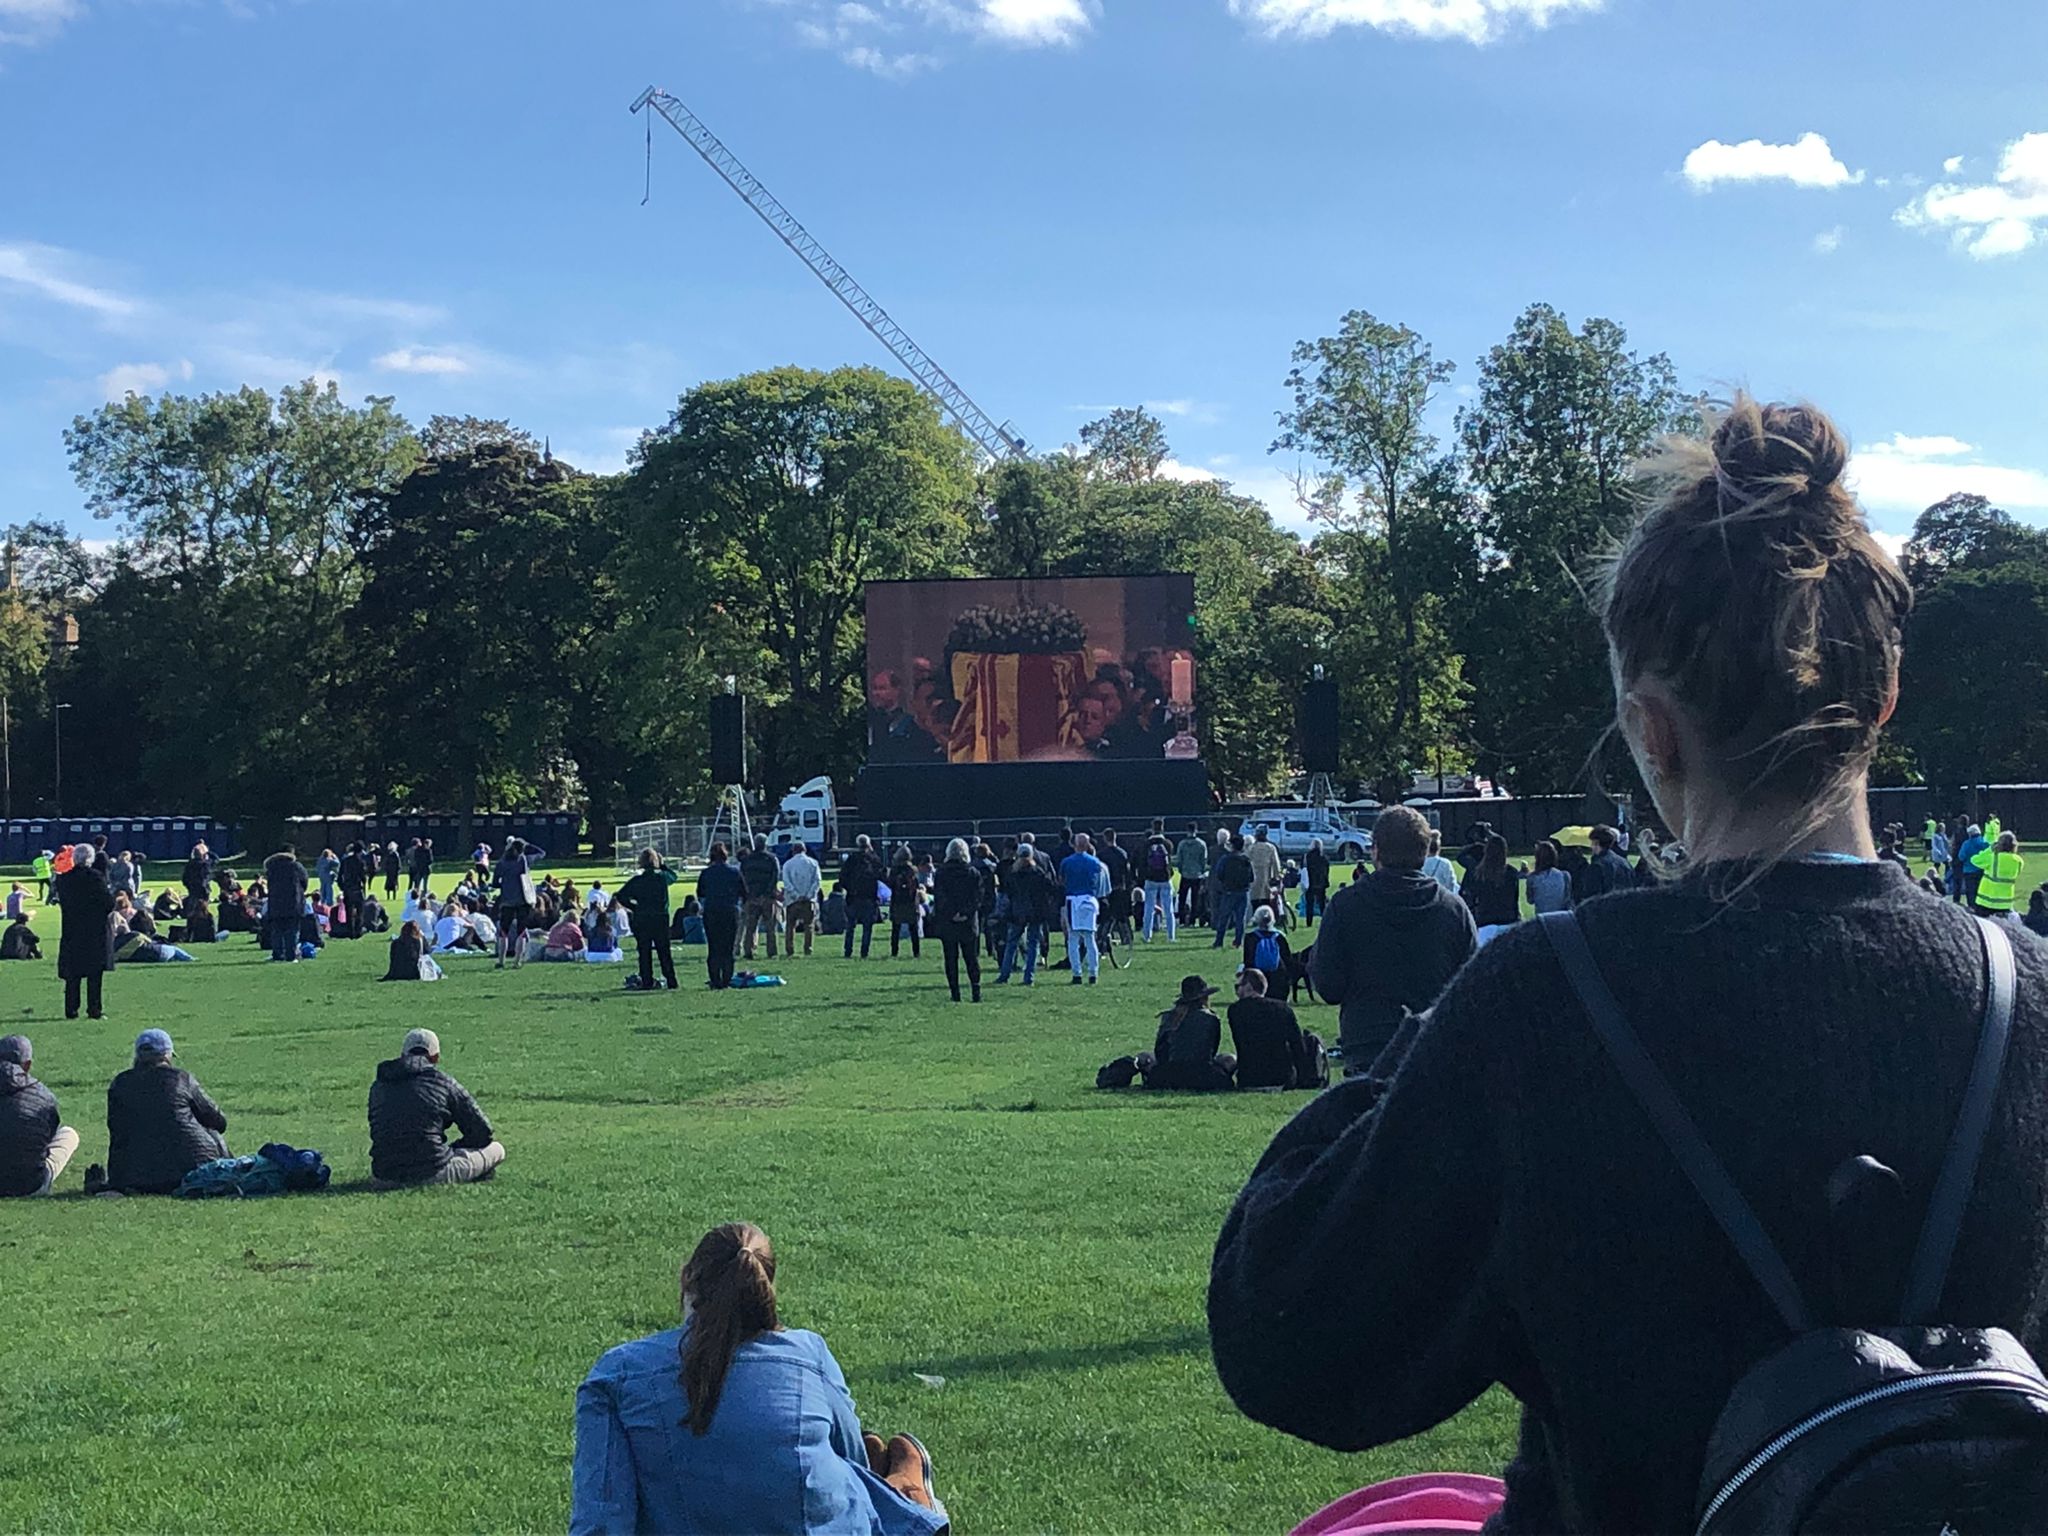 Crowds watch funeral on big screen at Meadows